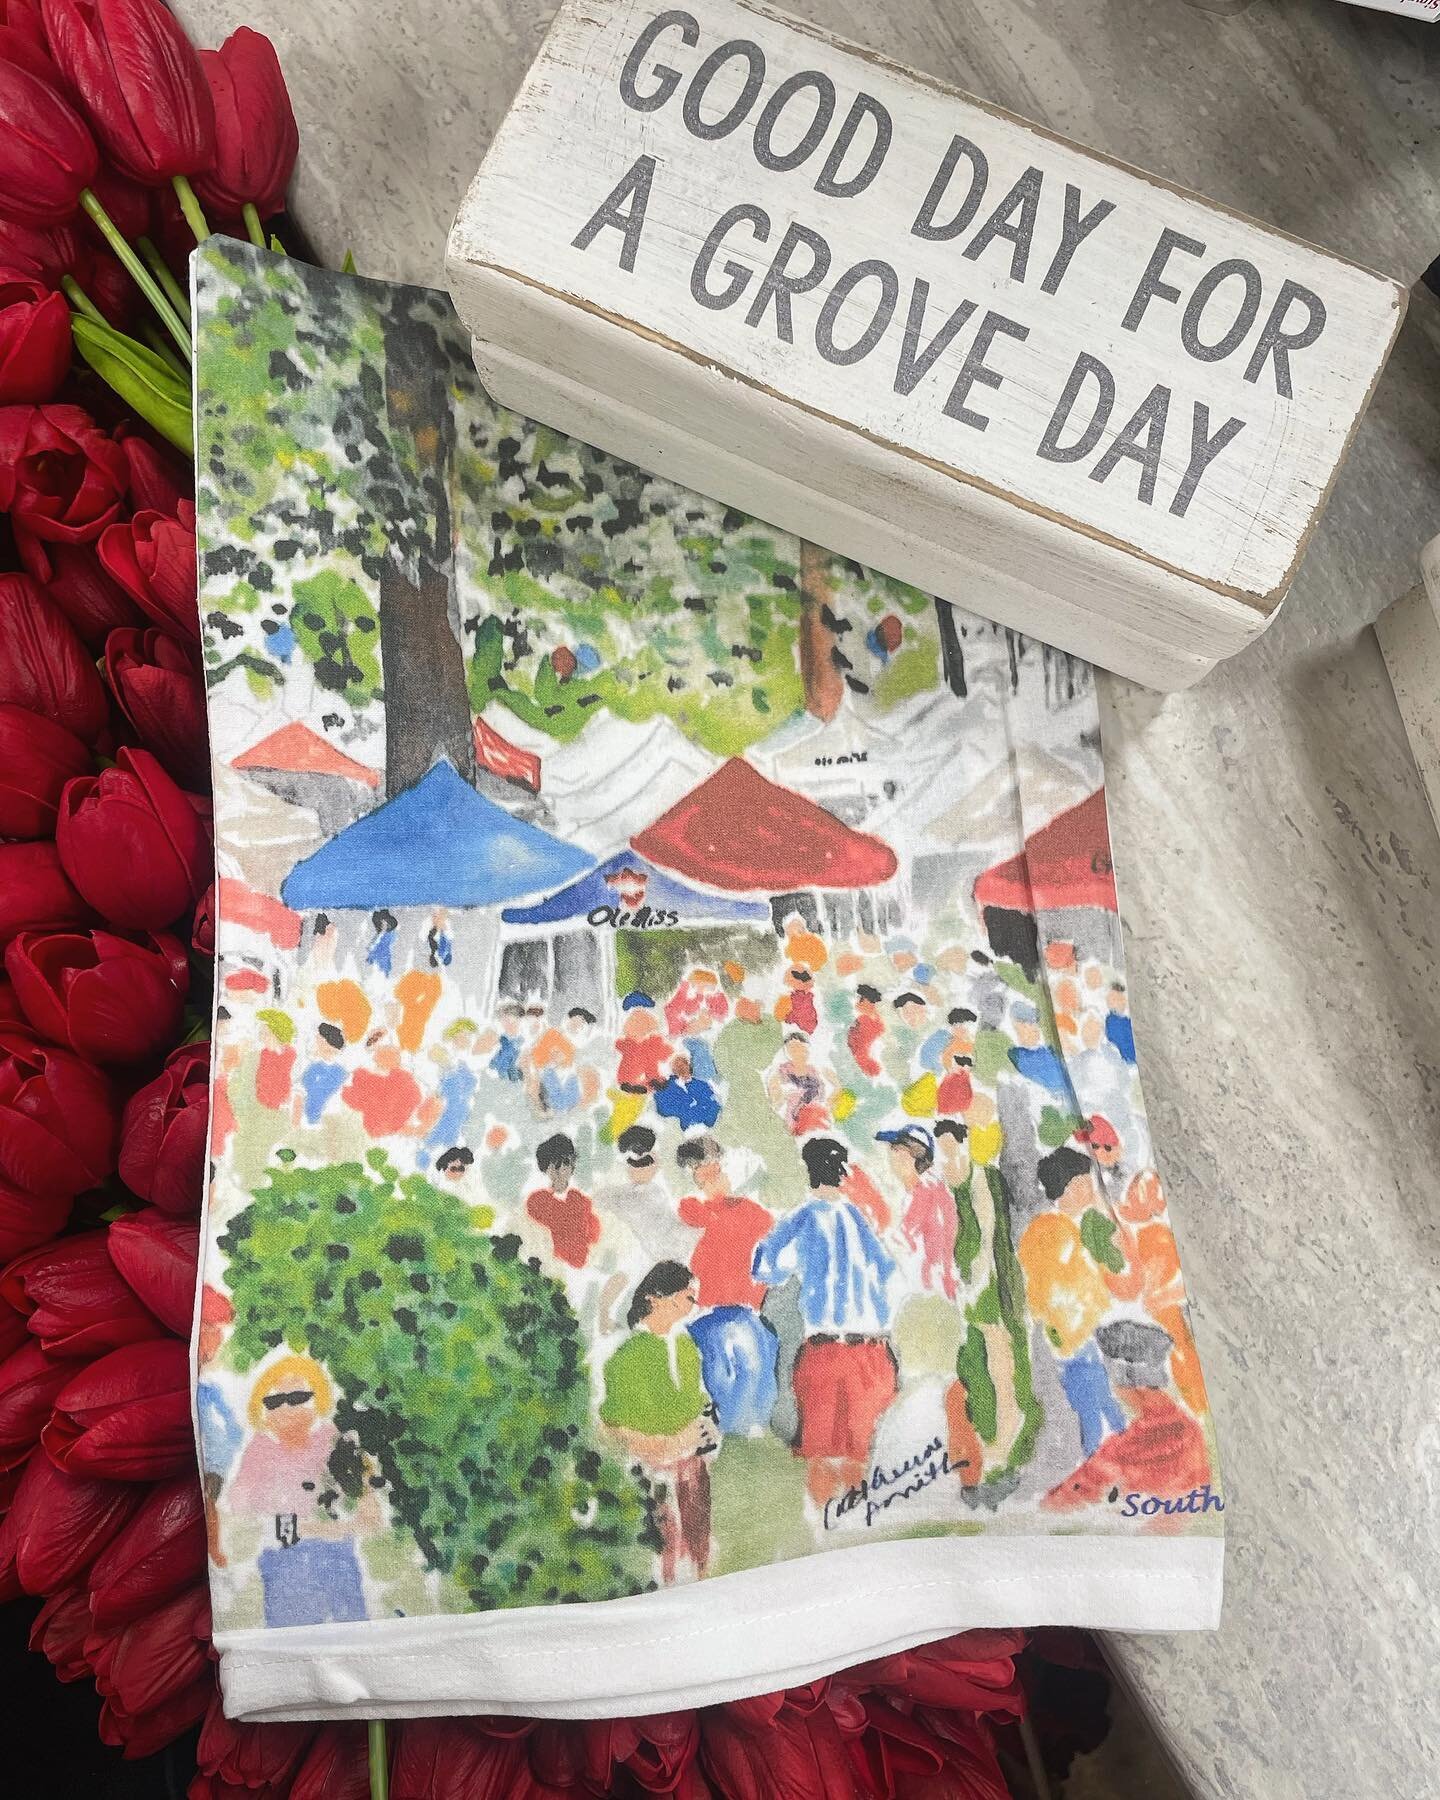 Always a &ldquo;good day for a Grove day.&rdquo; Come visit us before you go! We will be open until 4:00 today! Closed Sunday! Regular hours Monday!